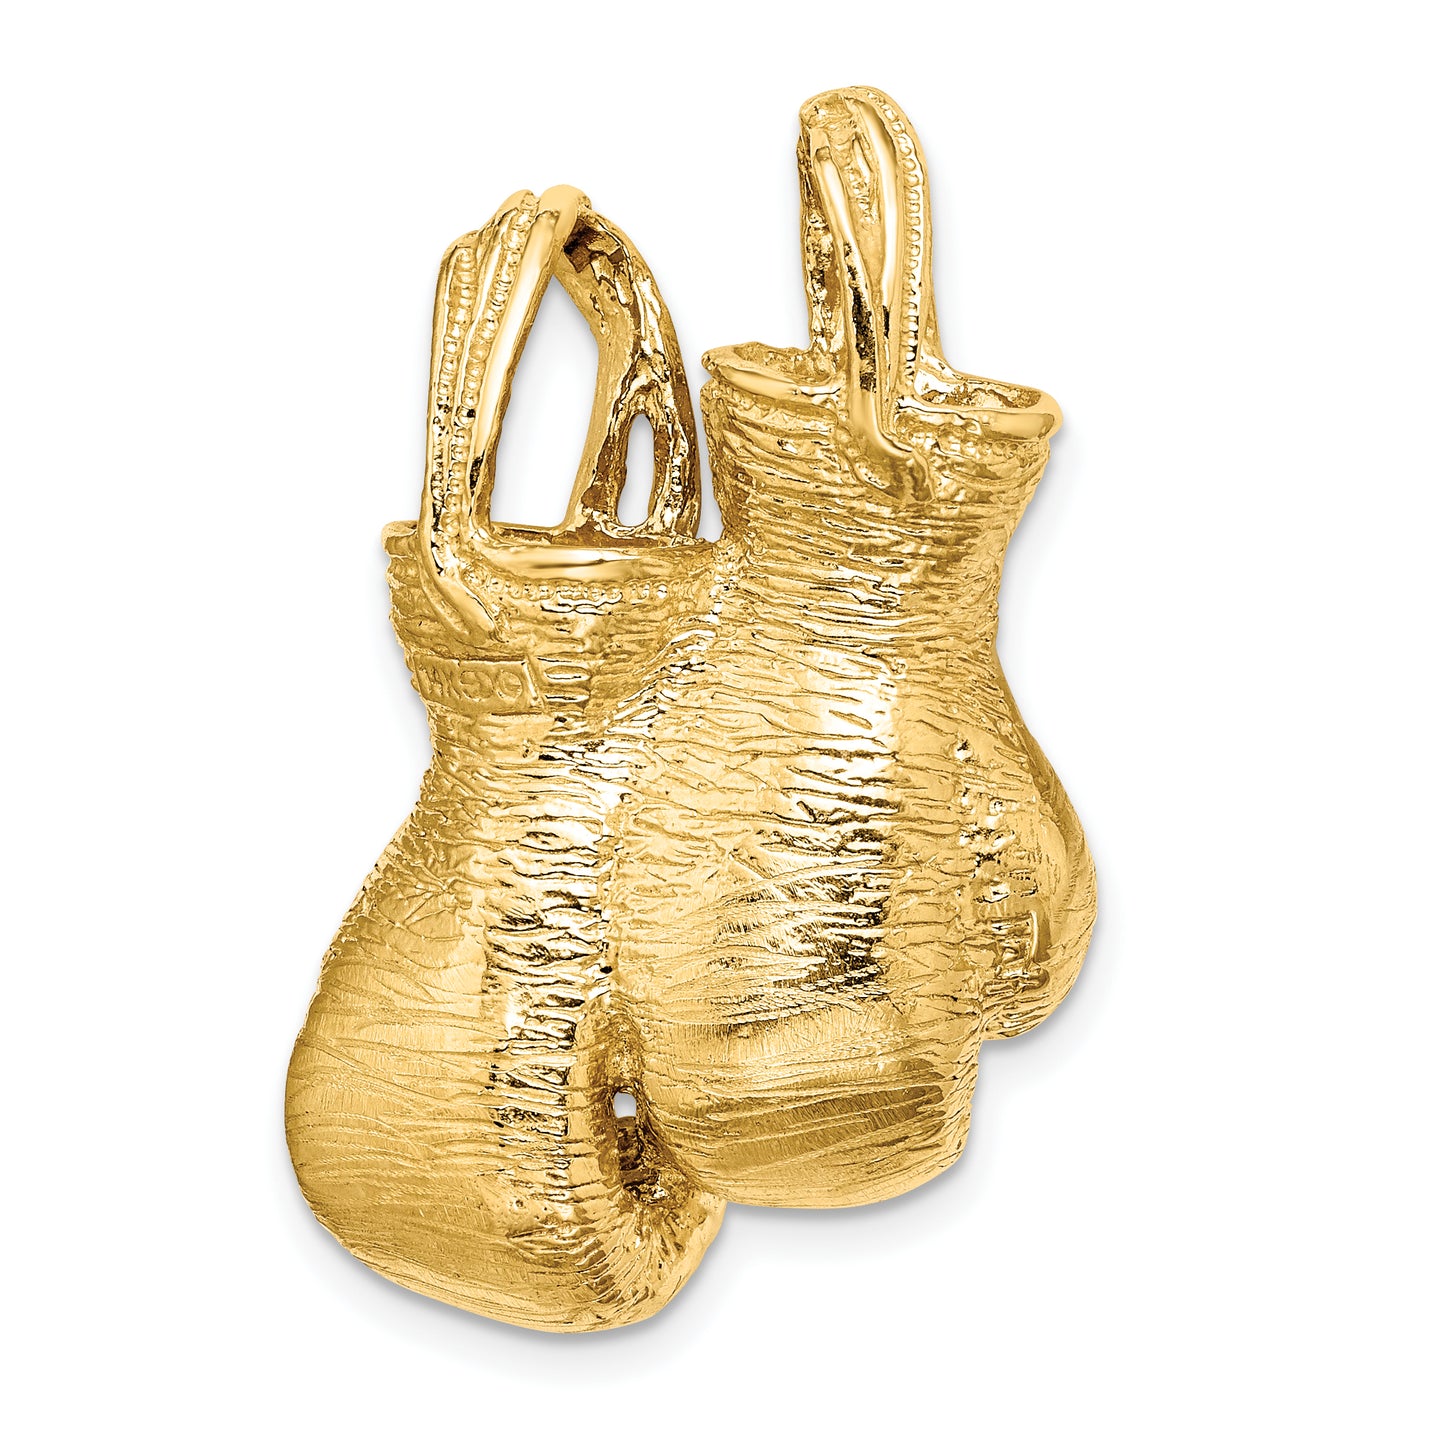 10K 3-D Textured Double Boxing Gloves Charm